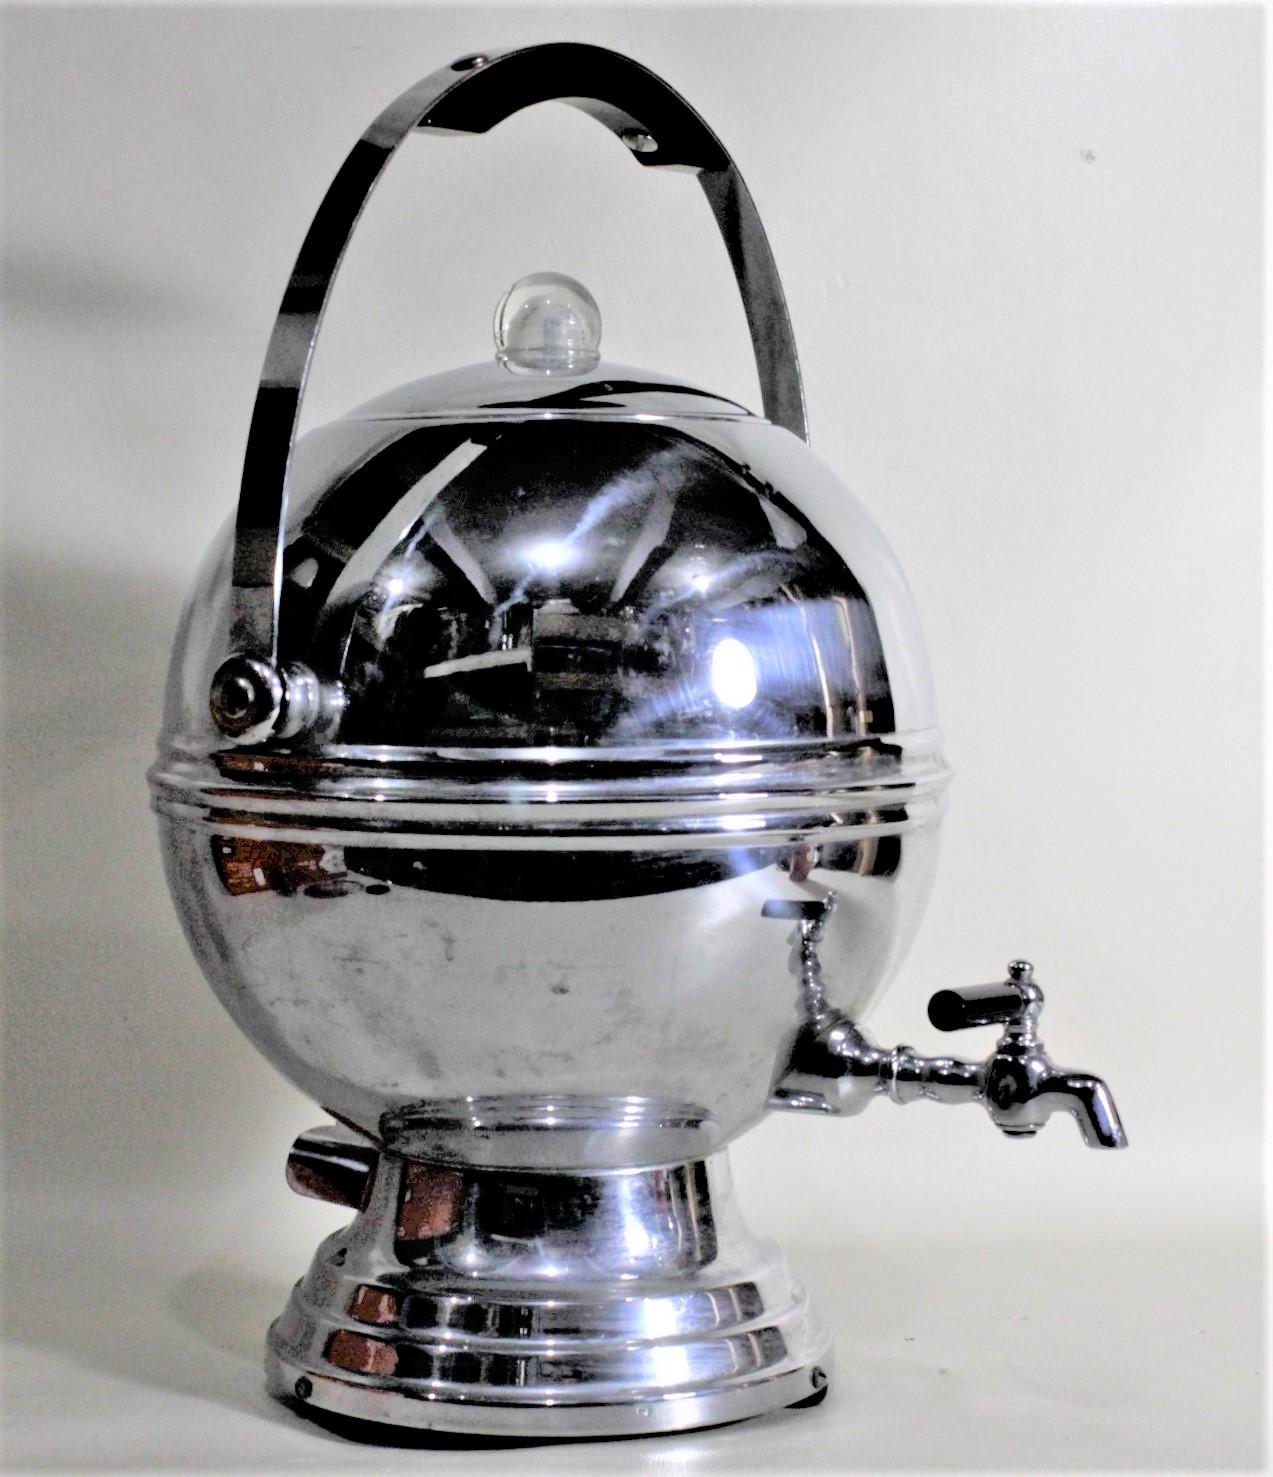 This Mid-Century Modern electric coffee percolator was made by the Labelle's Silver Company of the United States in circa 1960 in the machine age style. This ball shaped percolator is done in chrome with black accents to the handle and spigot and